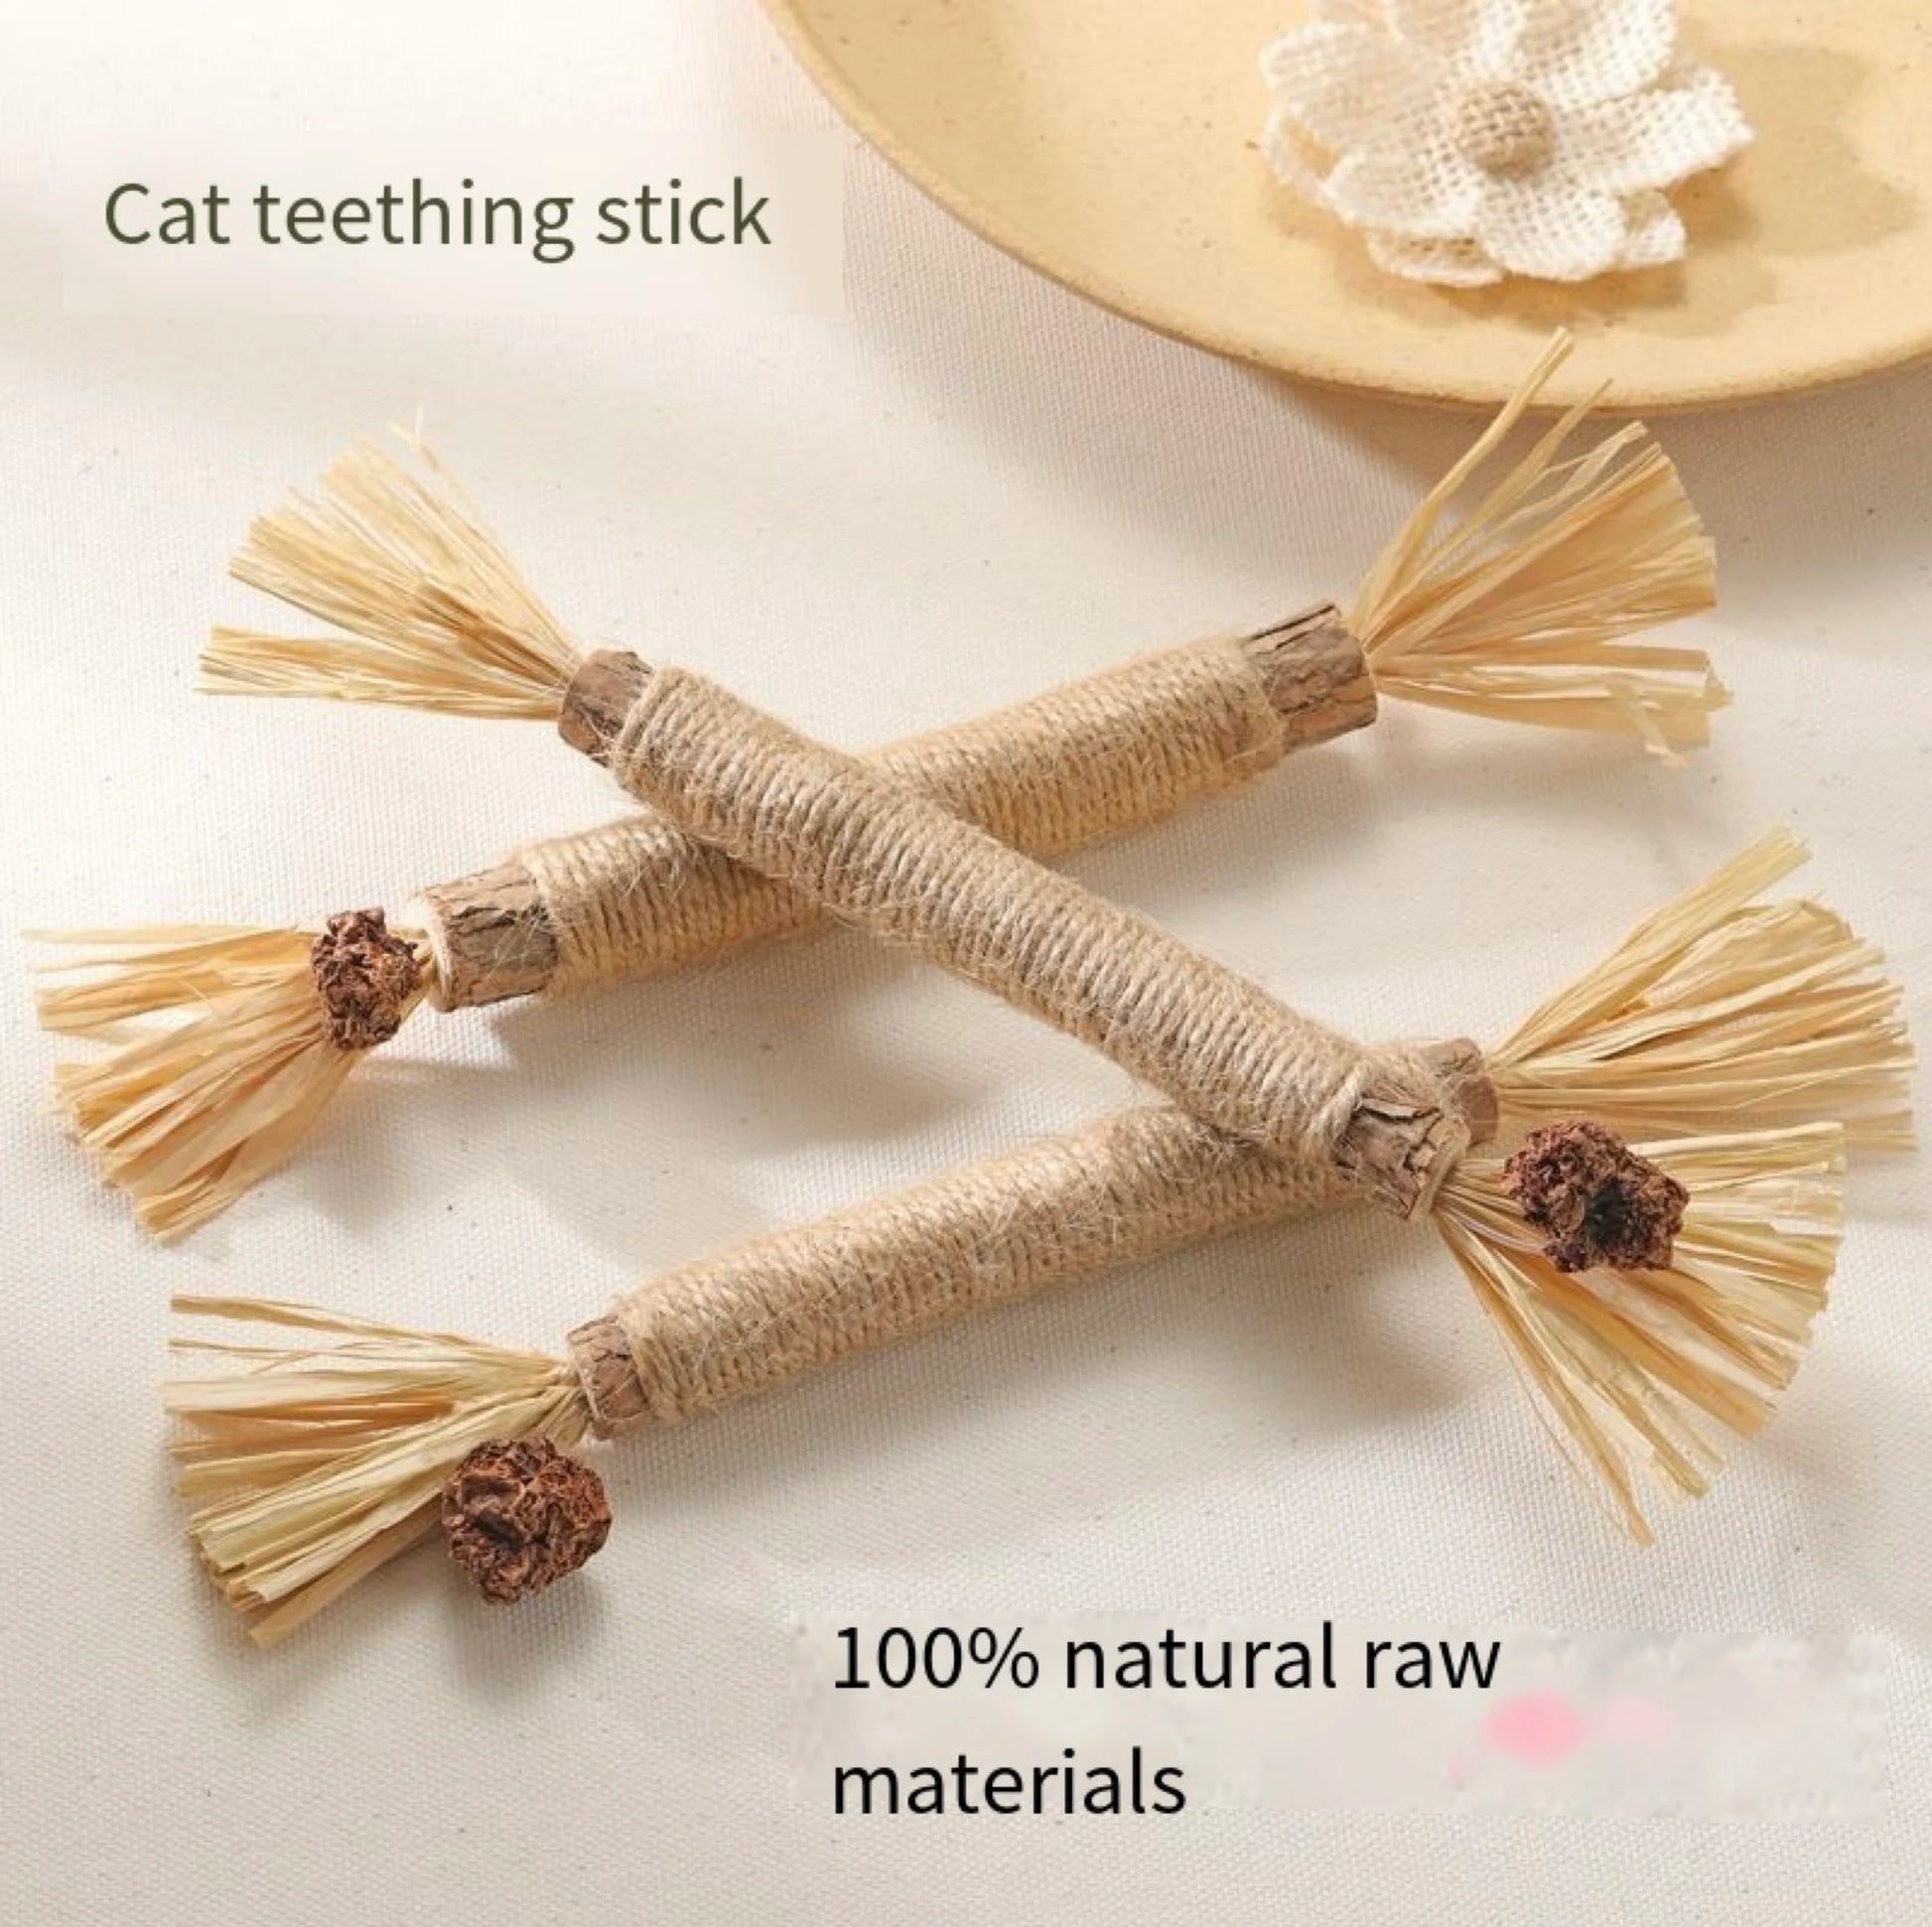 Steven Store™ Pet Cat Wooden Polygonum Stick: Natural chew stick for cats